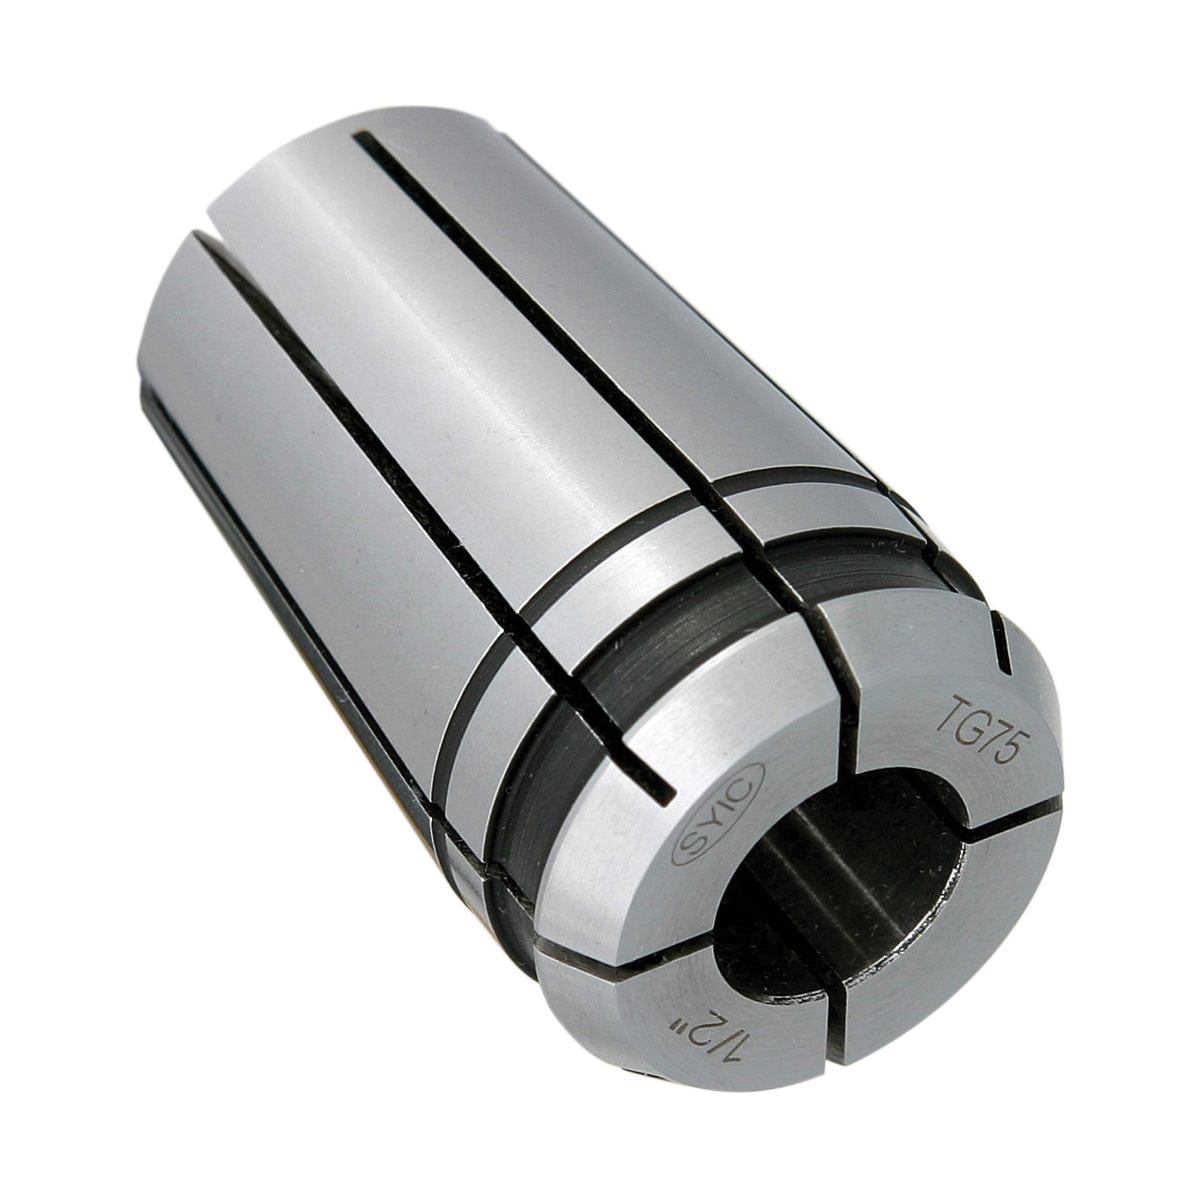 TG75 11/64" COLLET